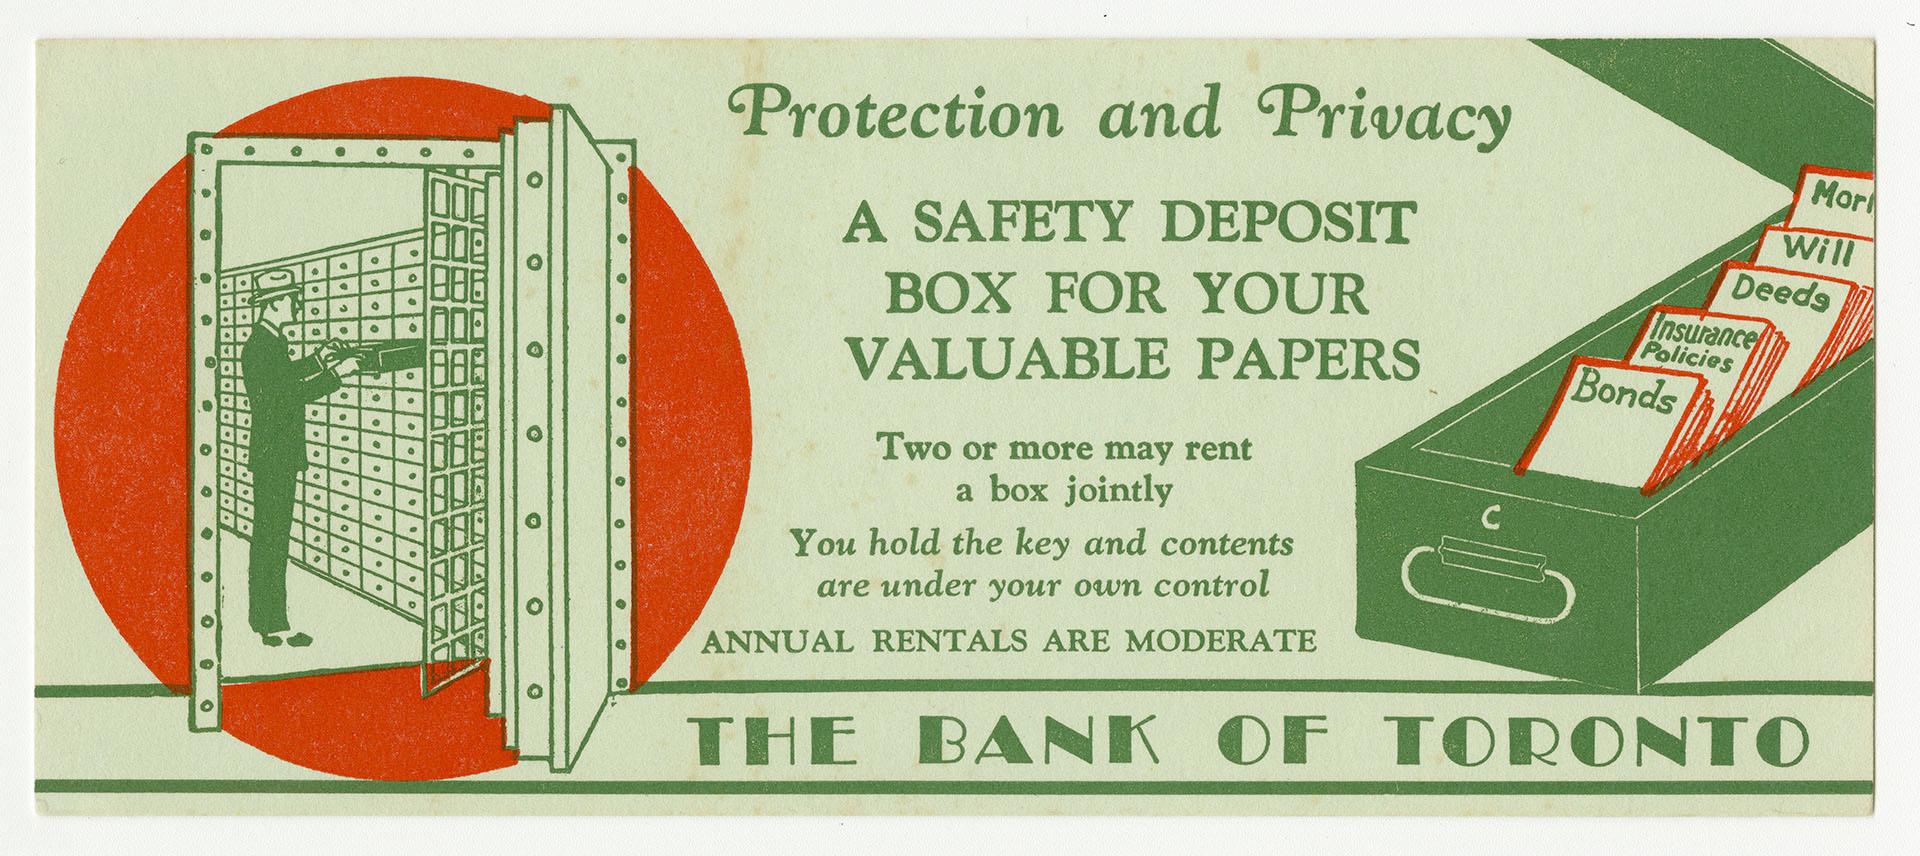 Protection and privacy a safety deposit box for your valuable papers